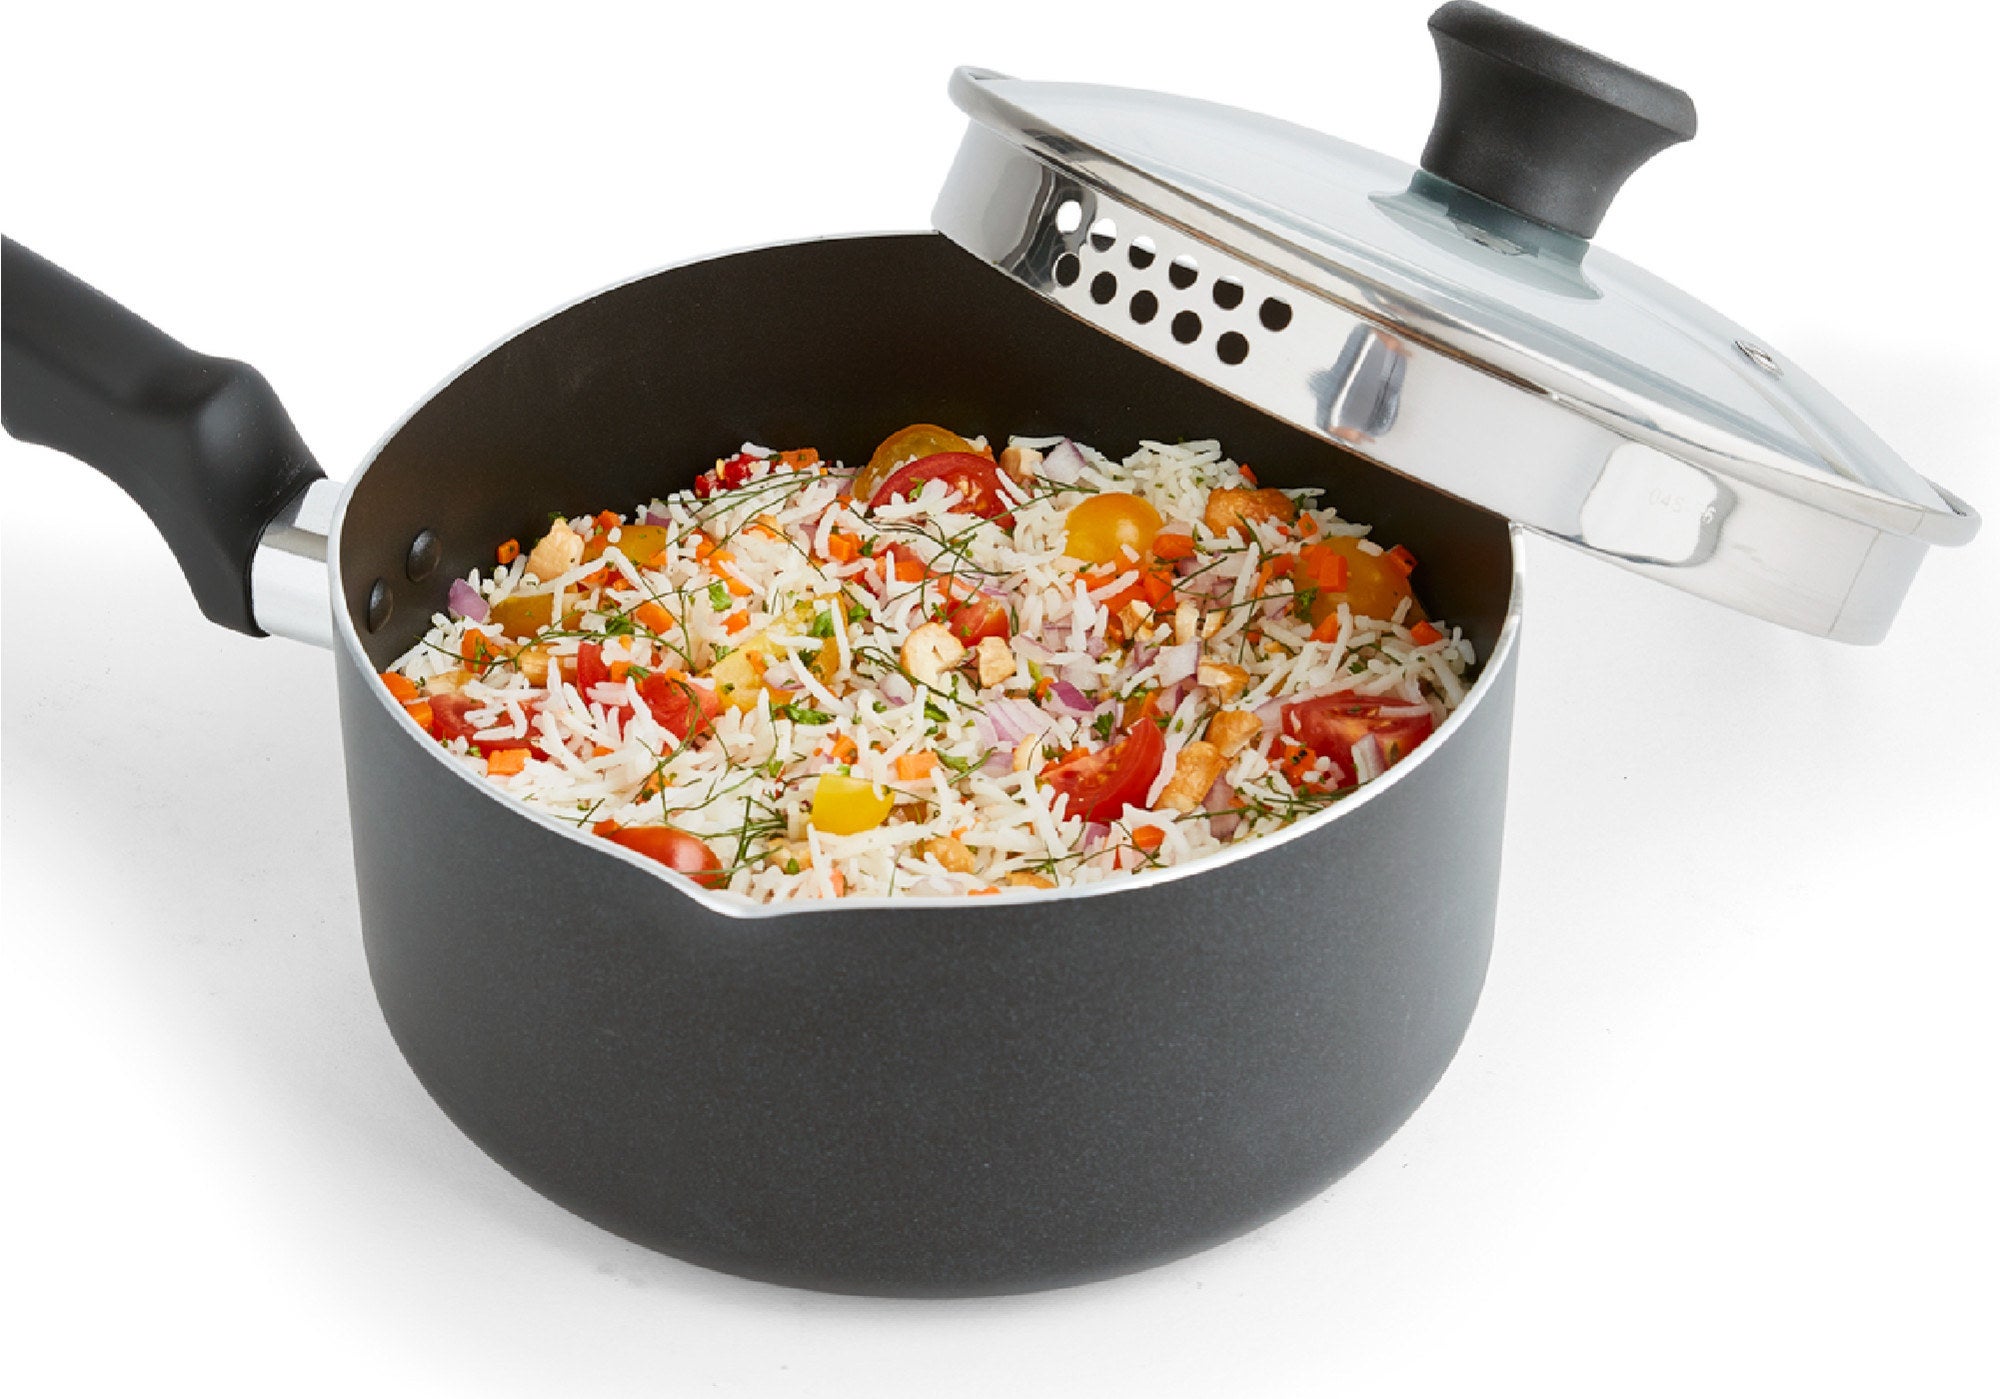 The non-stick saucepan with straining lid